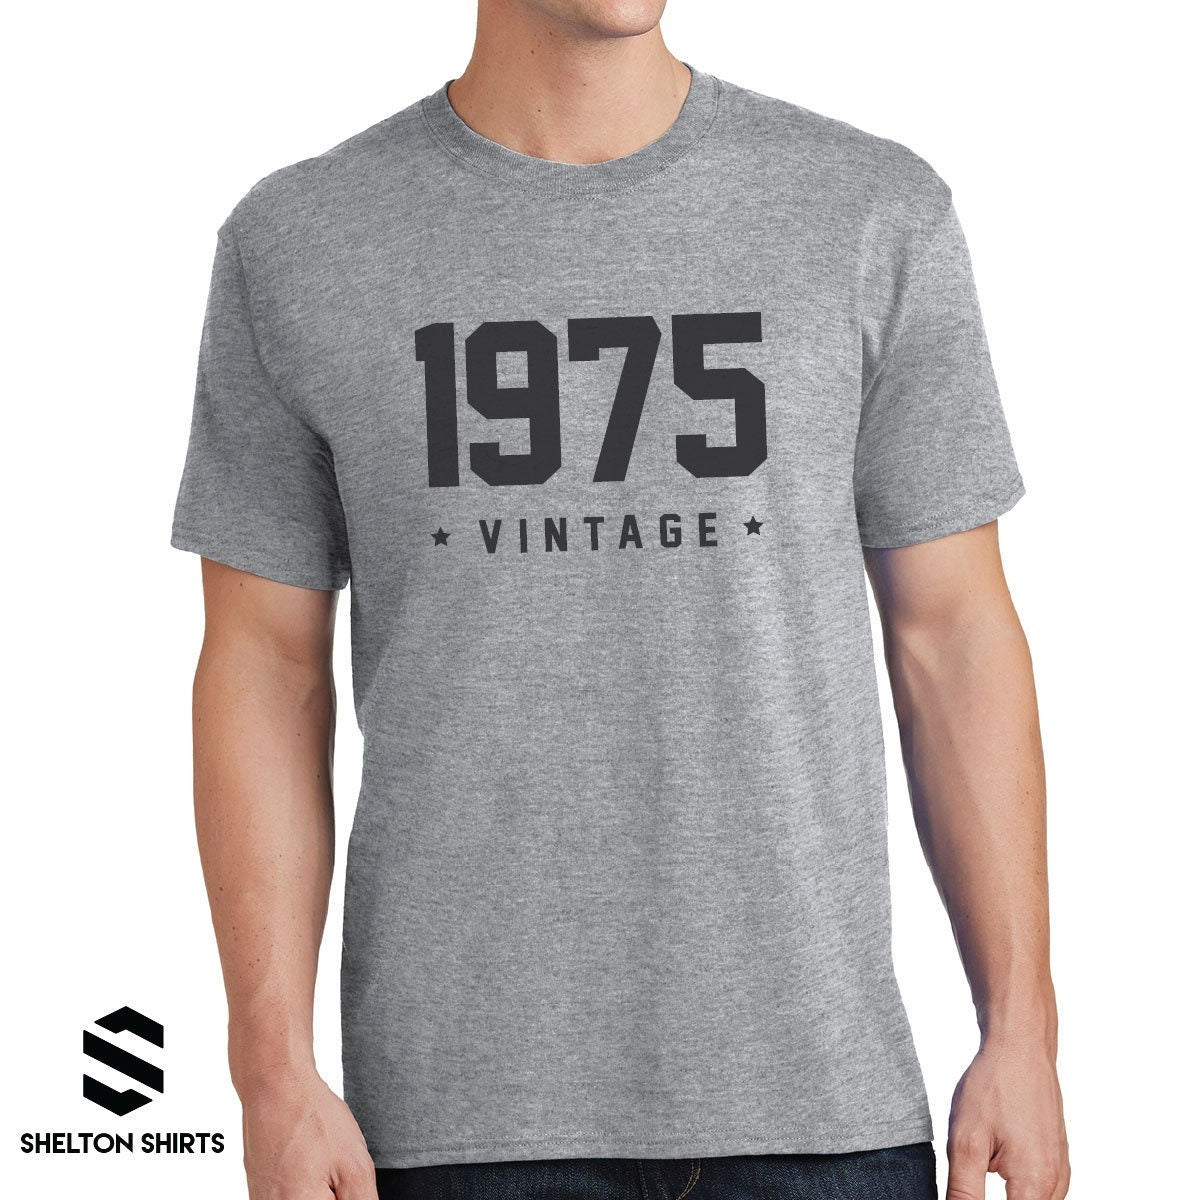 Birthyear Vintage T-shirt - Birthday Gift - Birthday Party Shirt - Any Year and Color